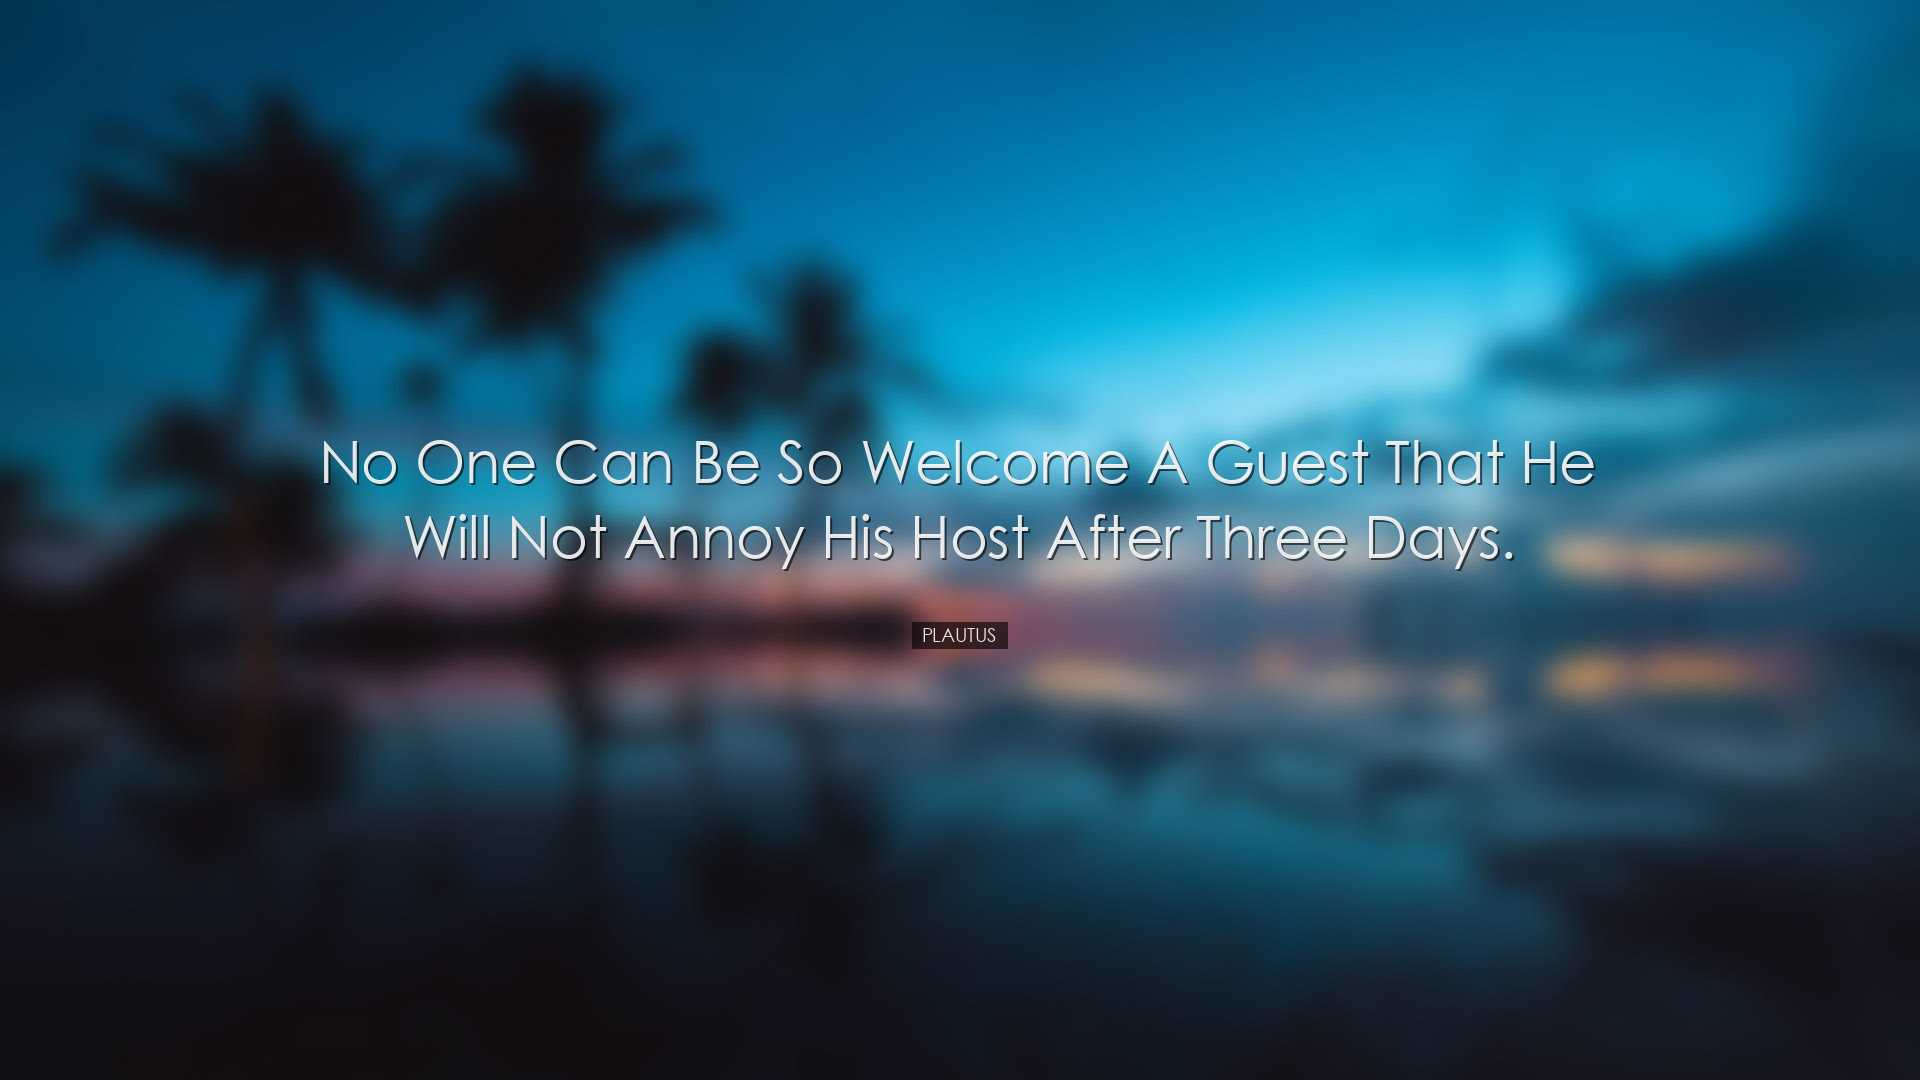 No one can be so welcome a guest that he will not annoy his host a